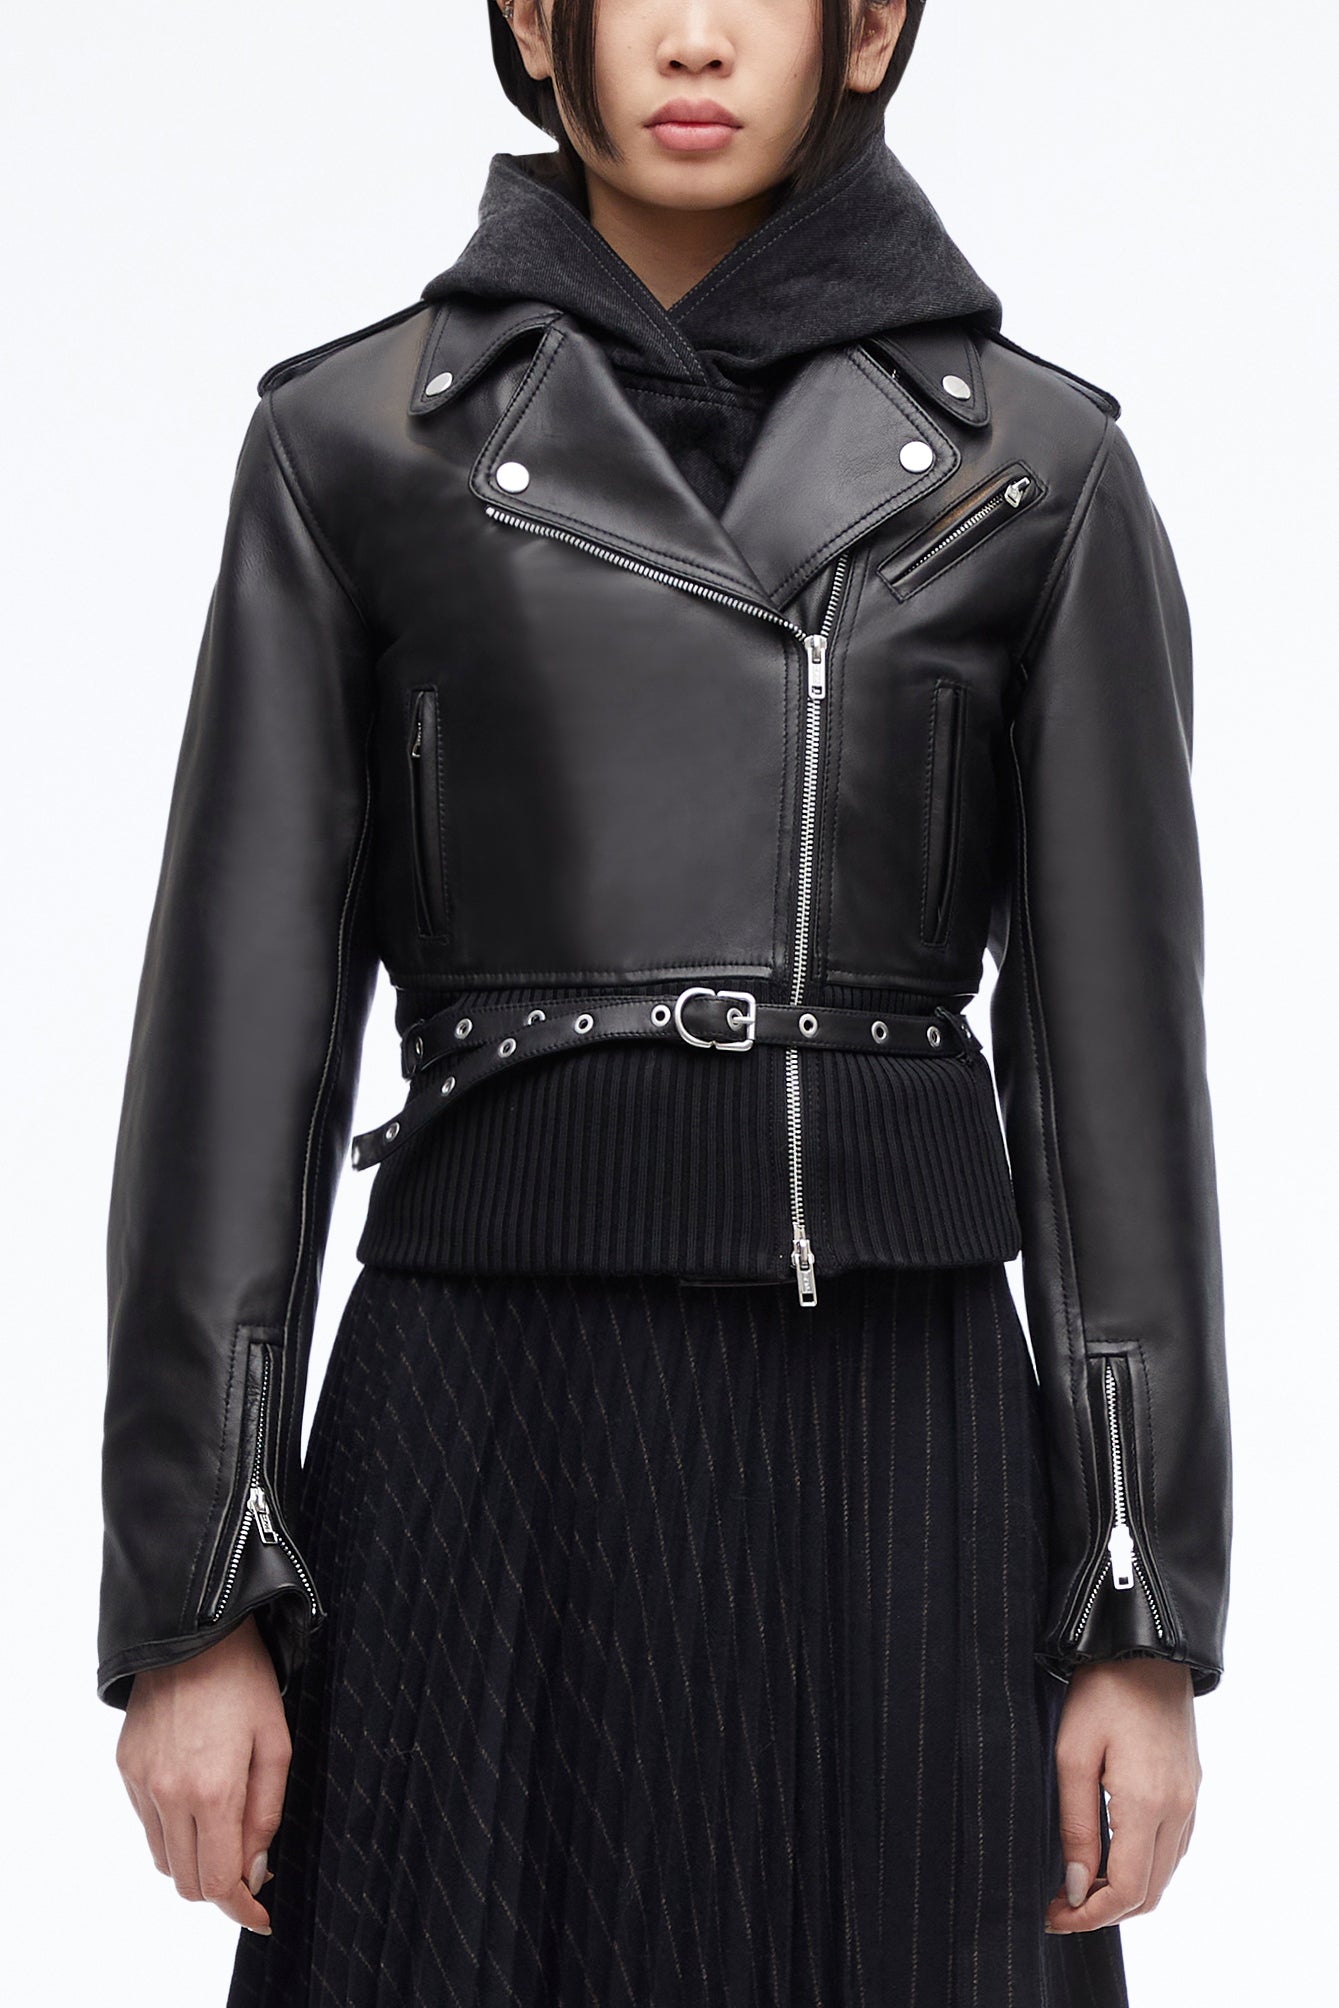 Double Breasted L' Agence Women's Billie Belted Leather Jacket